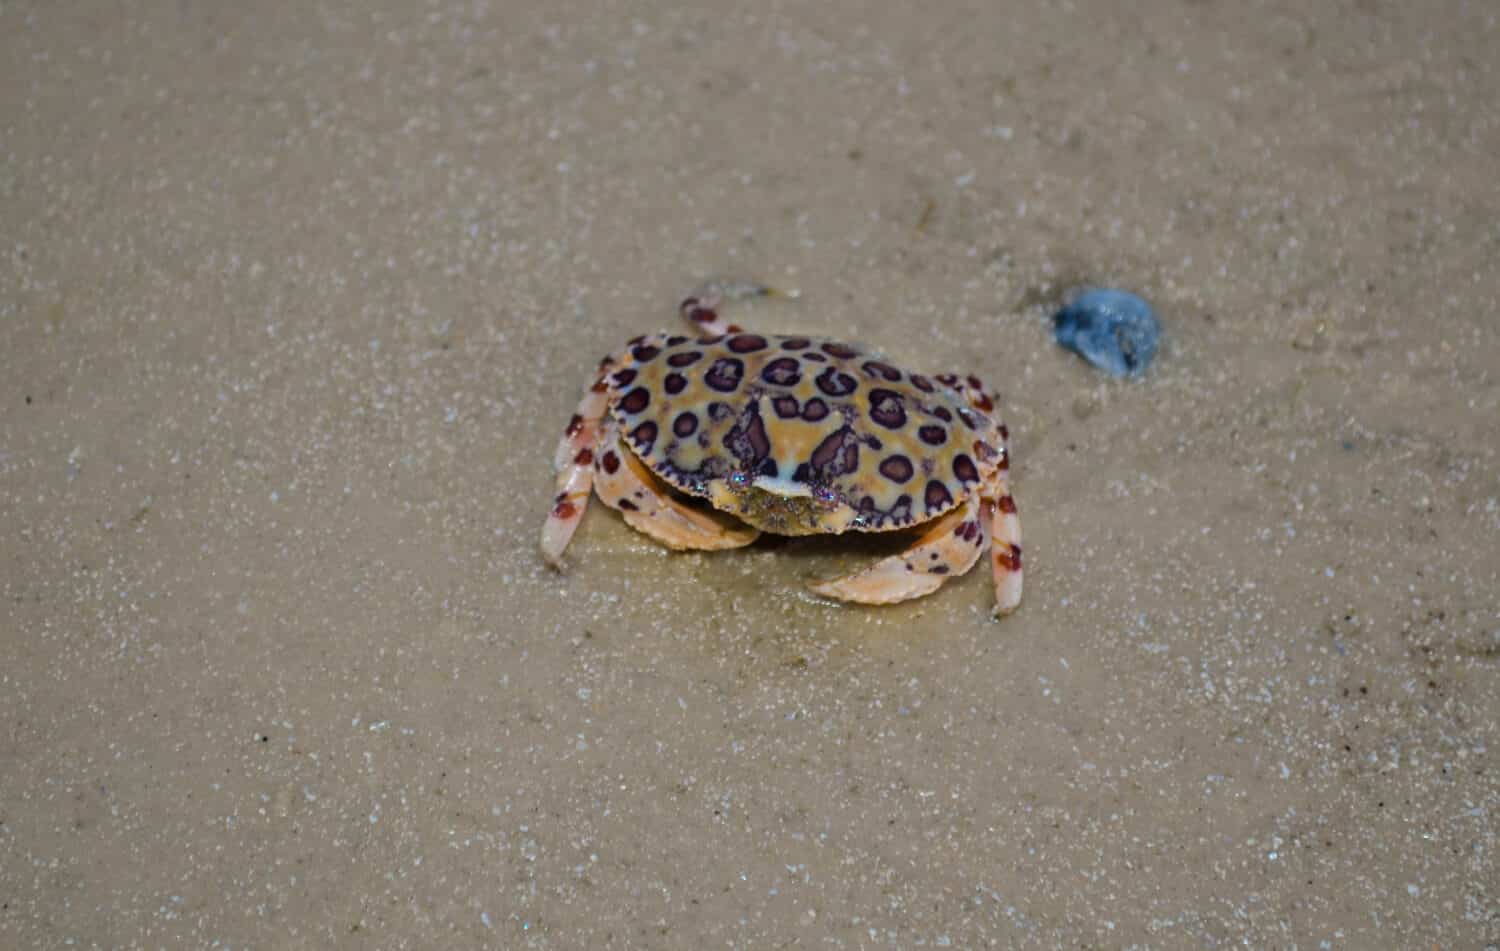 Leopard Crab on the beach